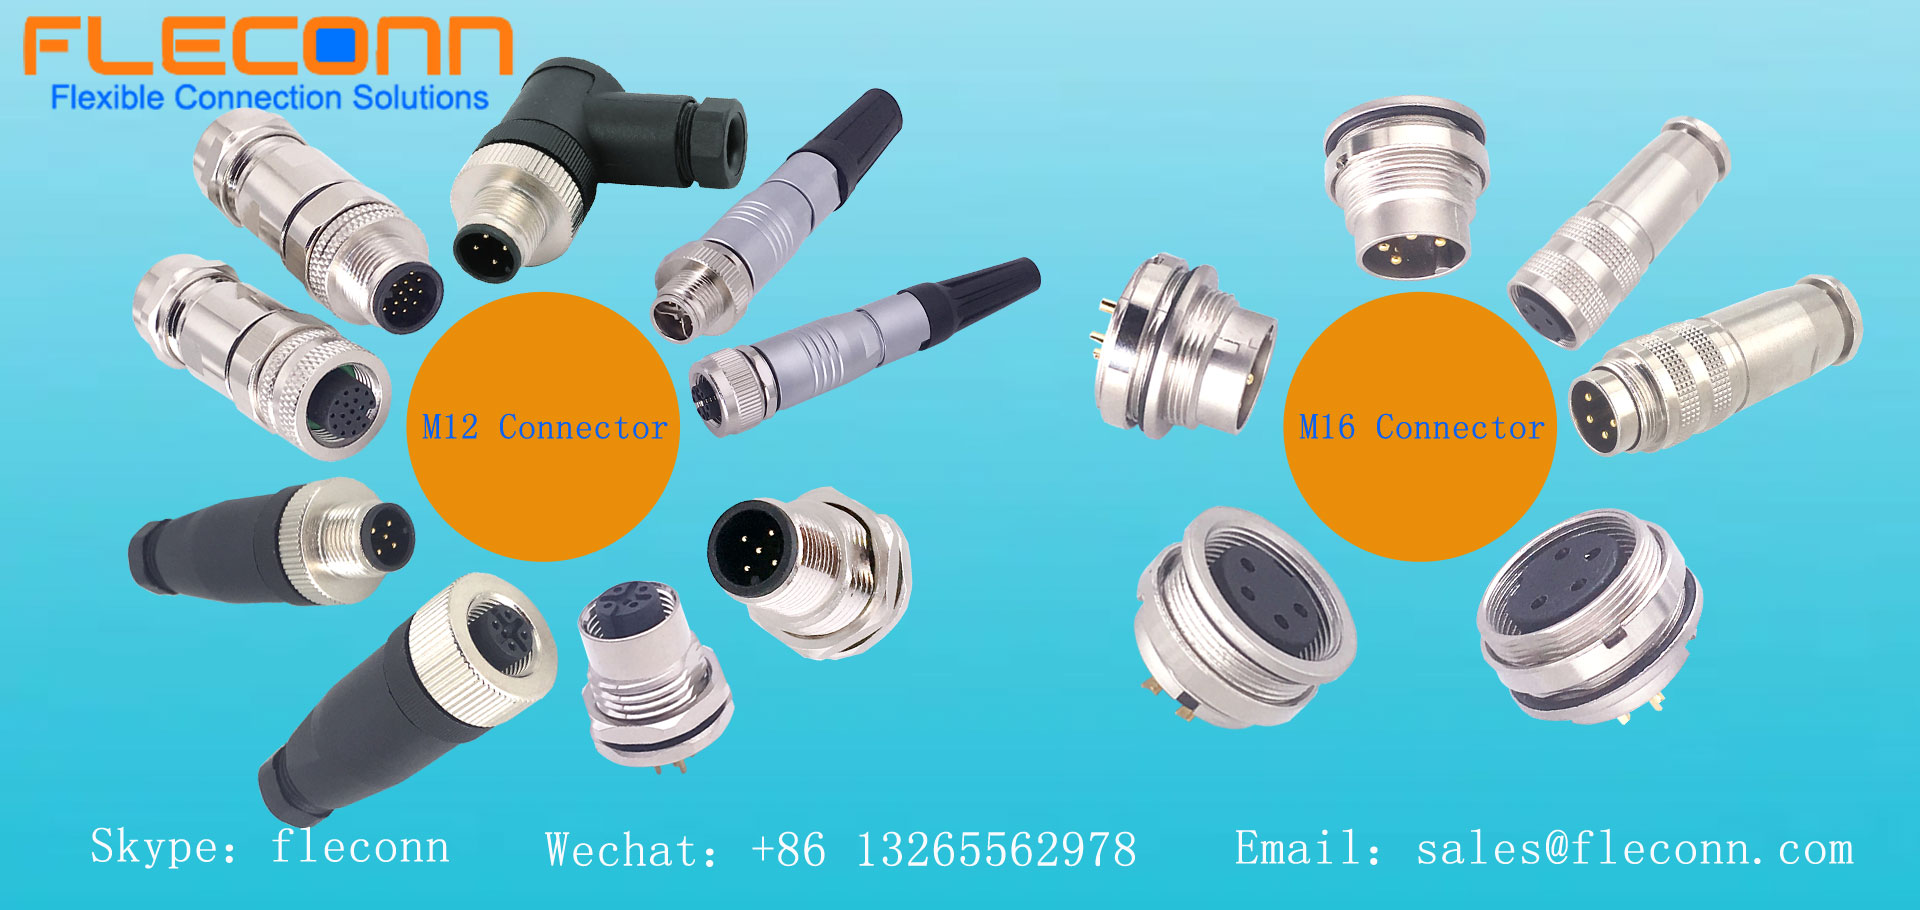 M12 Connectors, Field Installable, Panel Mountable, Waterproof Male and Female Connector